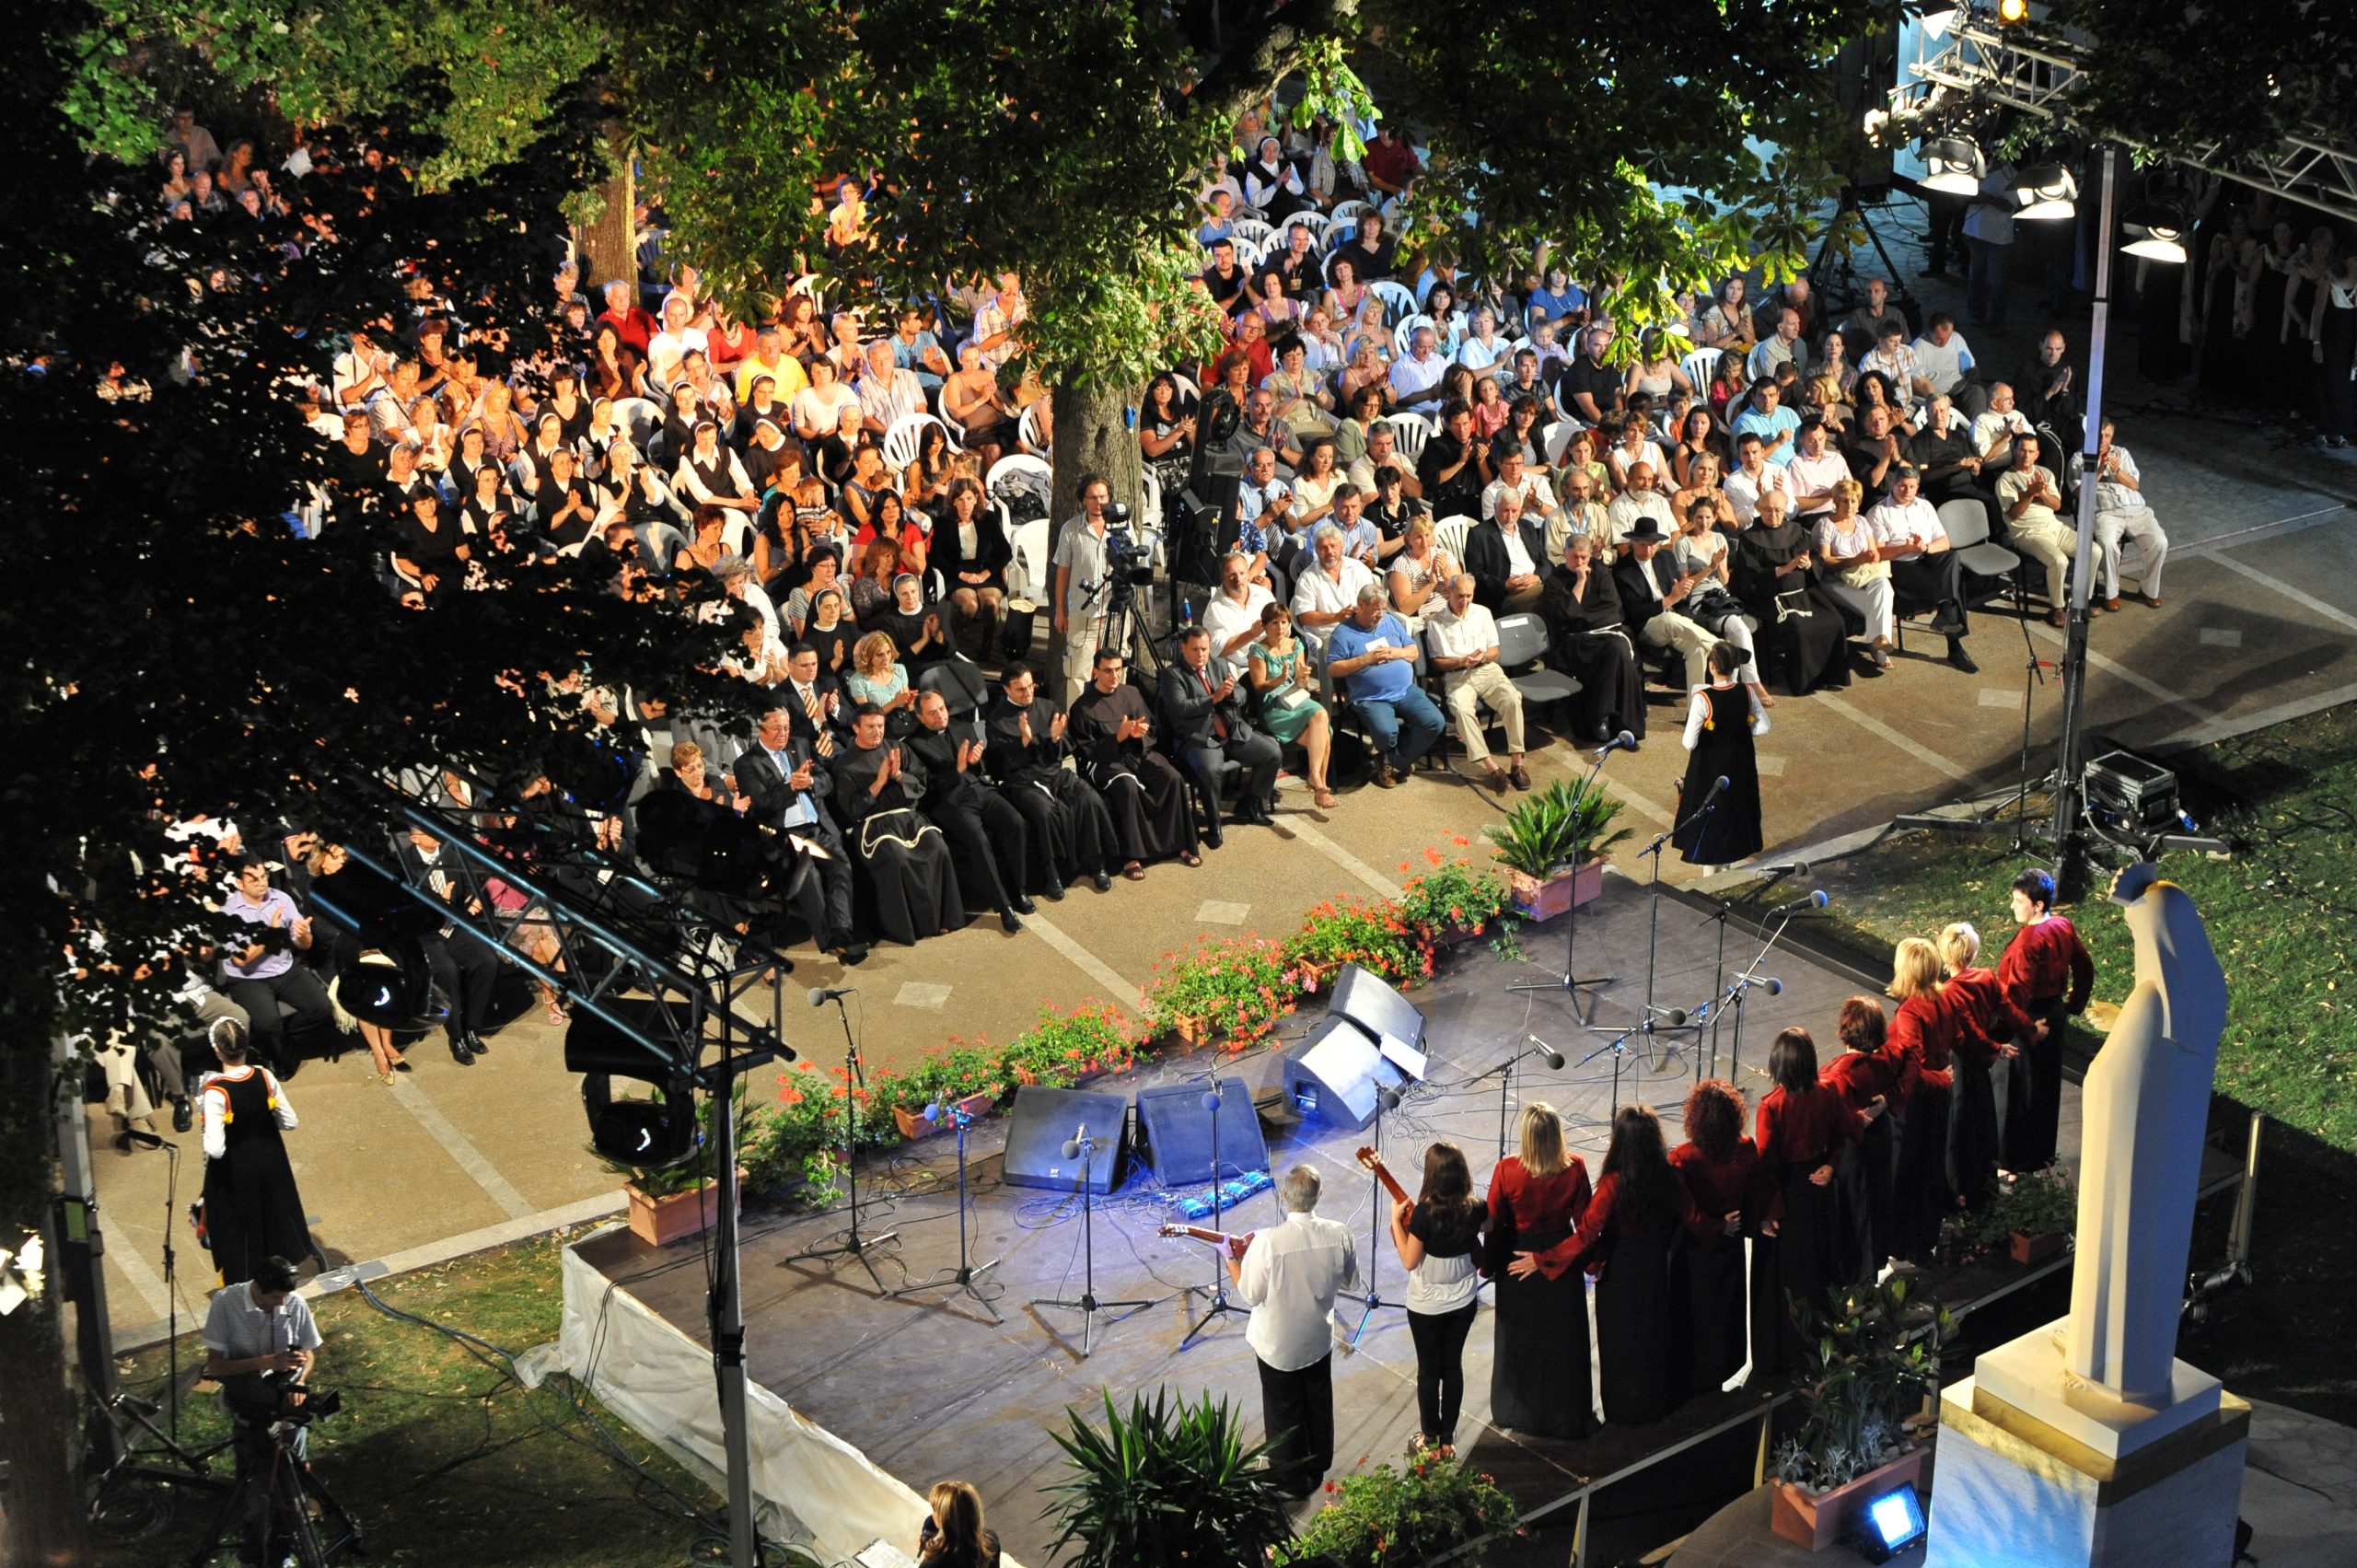 Dalmatian harmony-singing groups to the Madonna of Sinj Festival